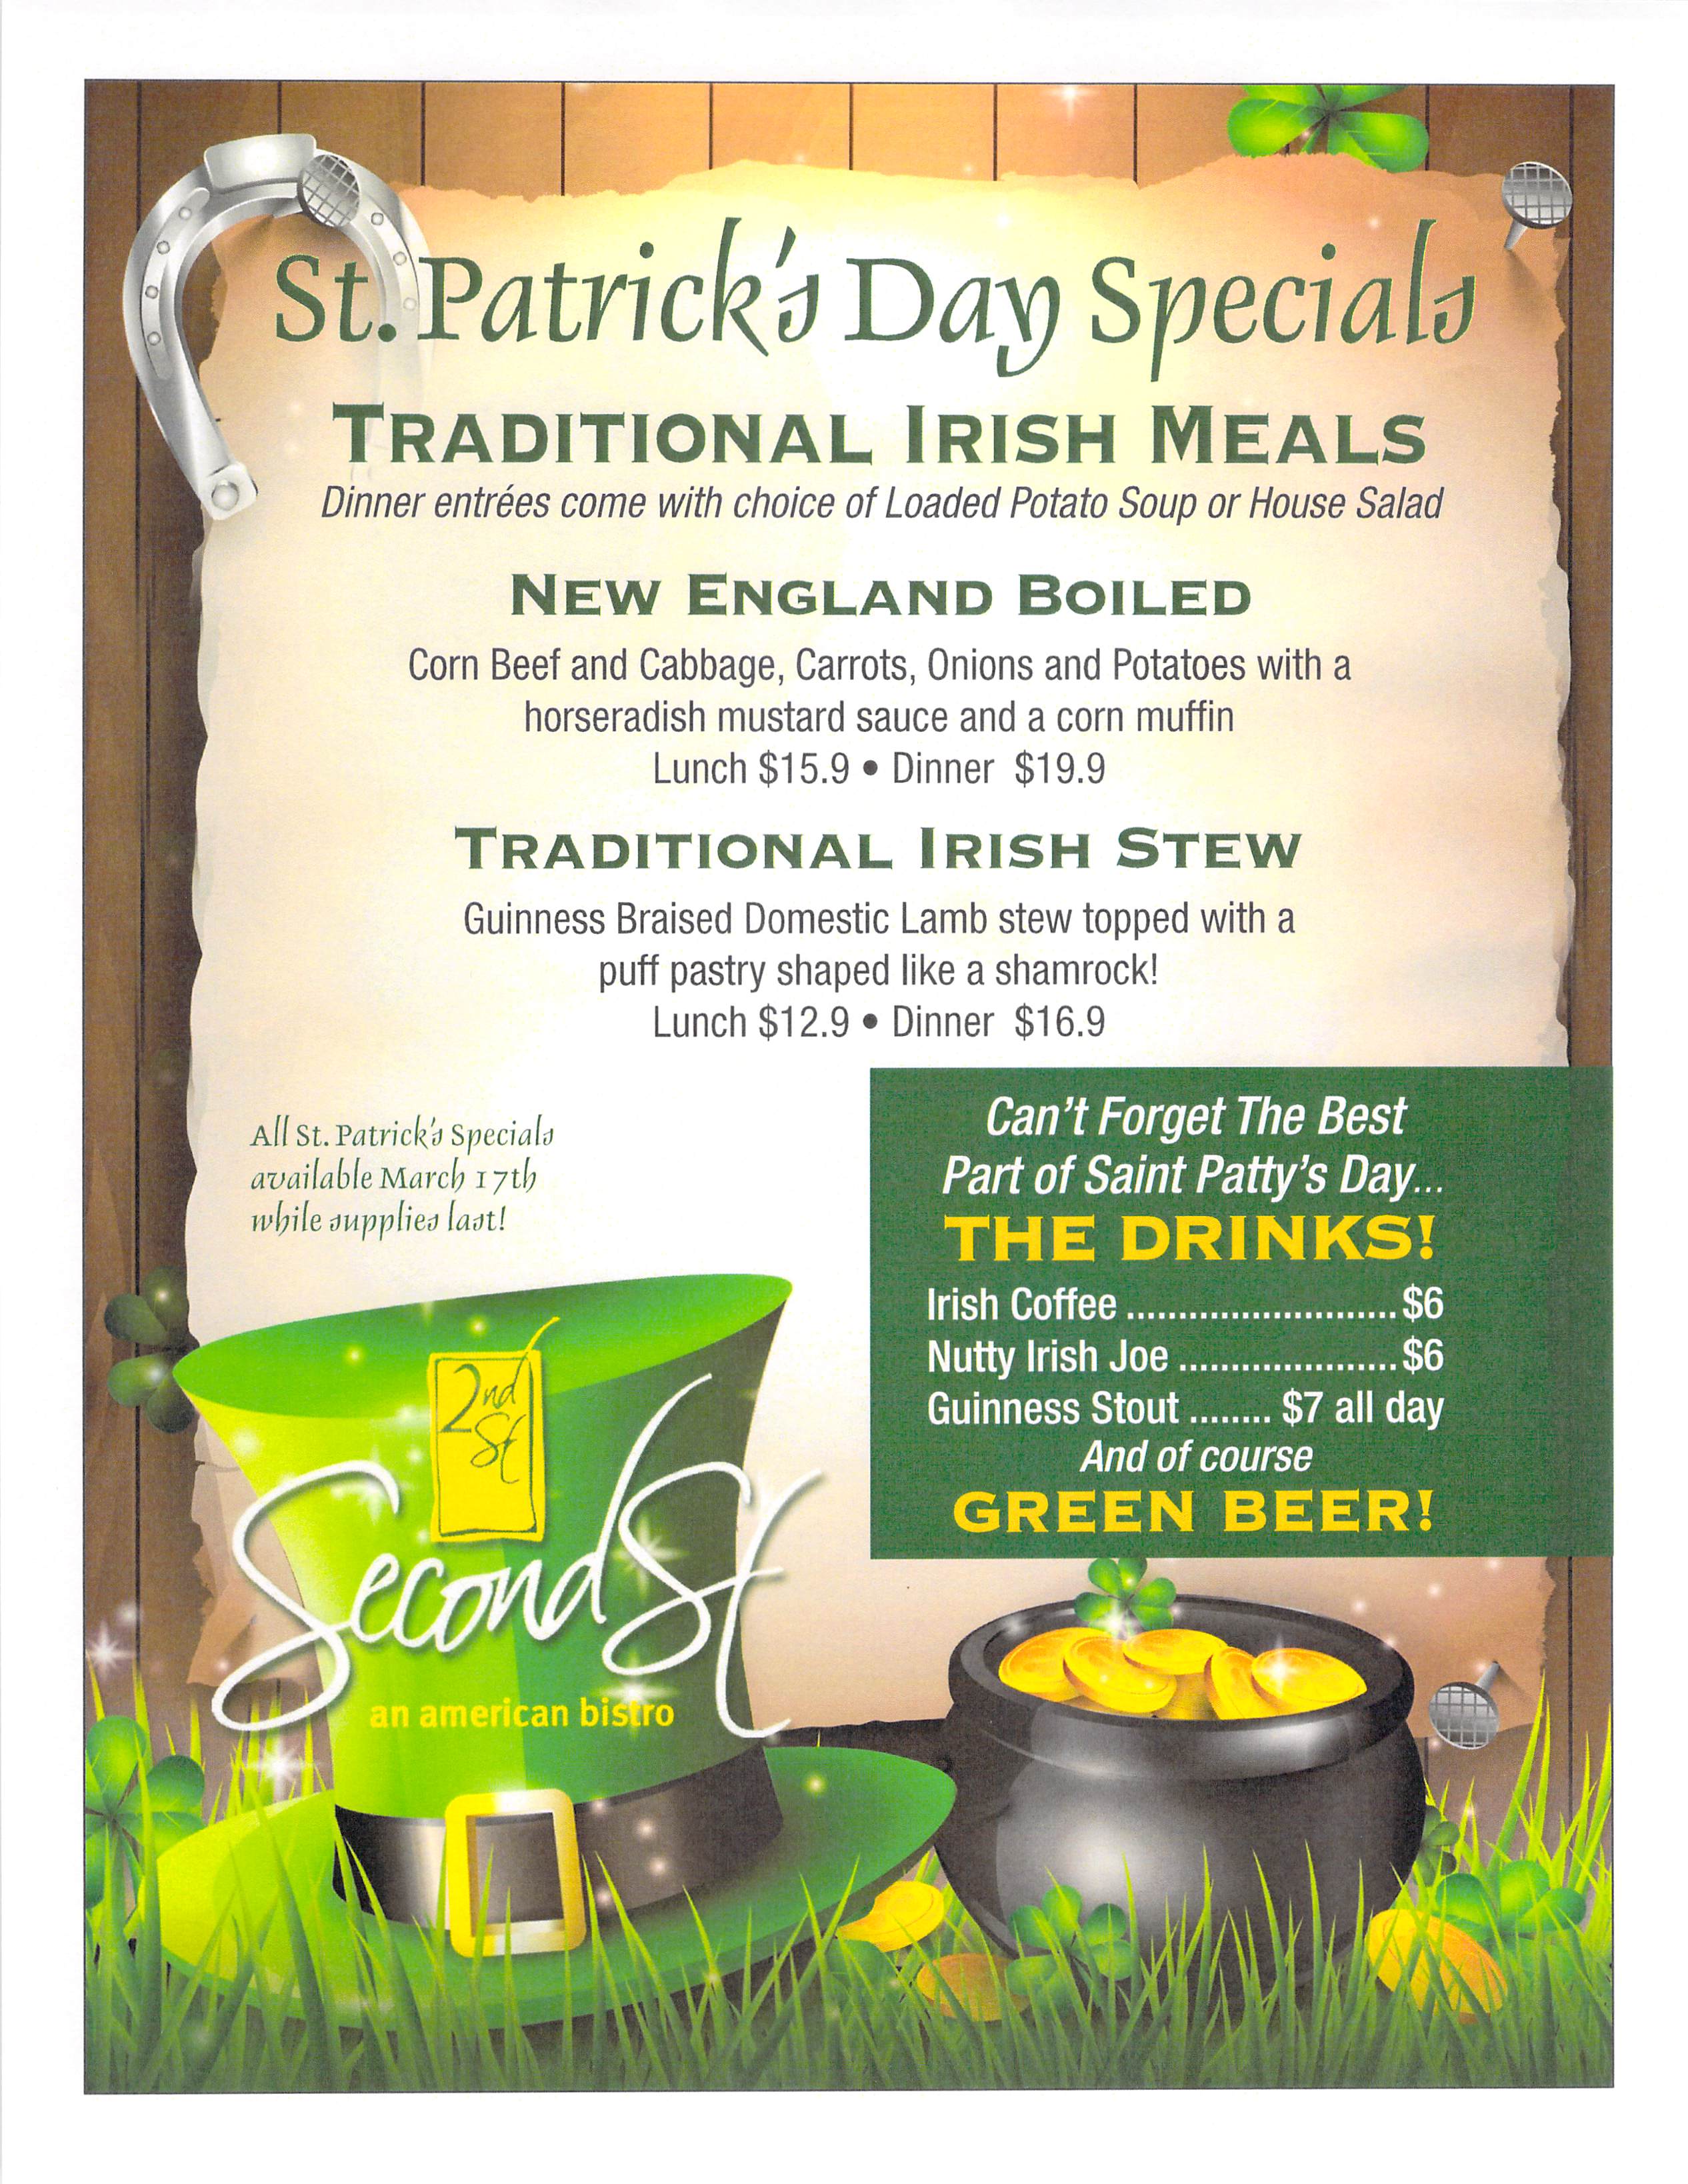 Popular St. Patrick's Day traditions in America